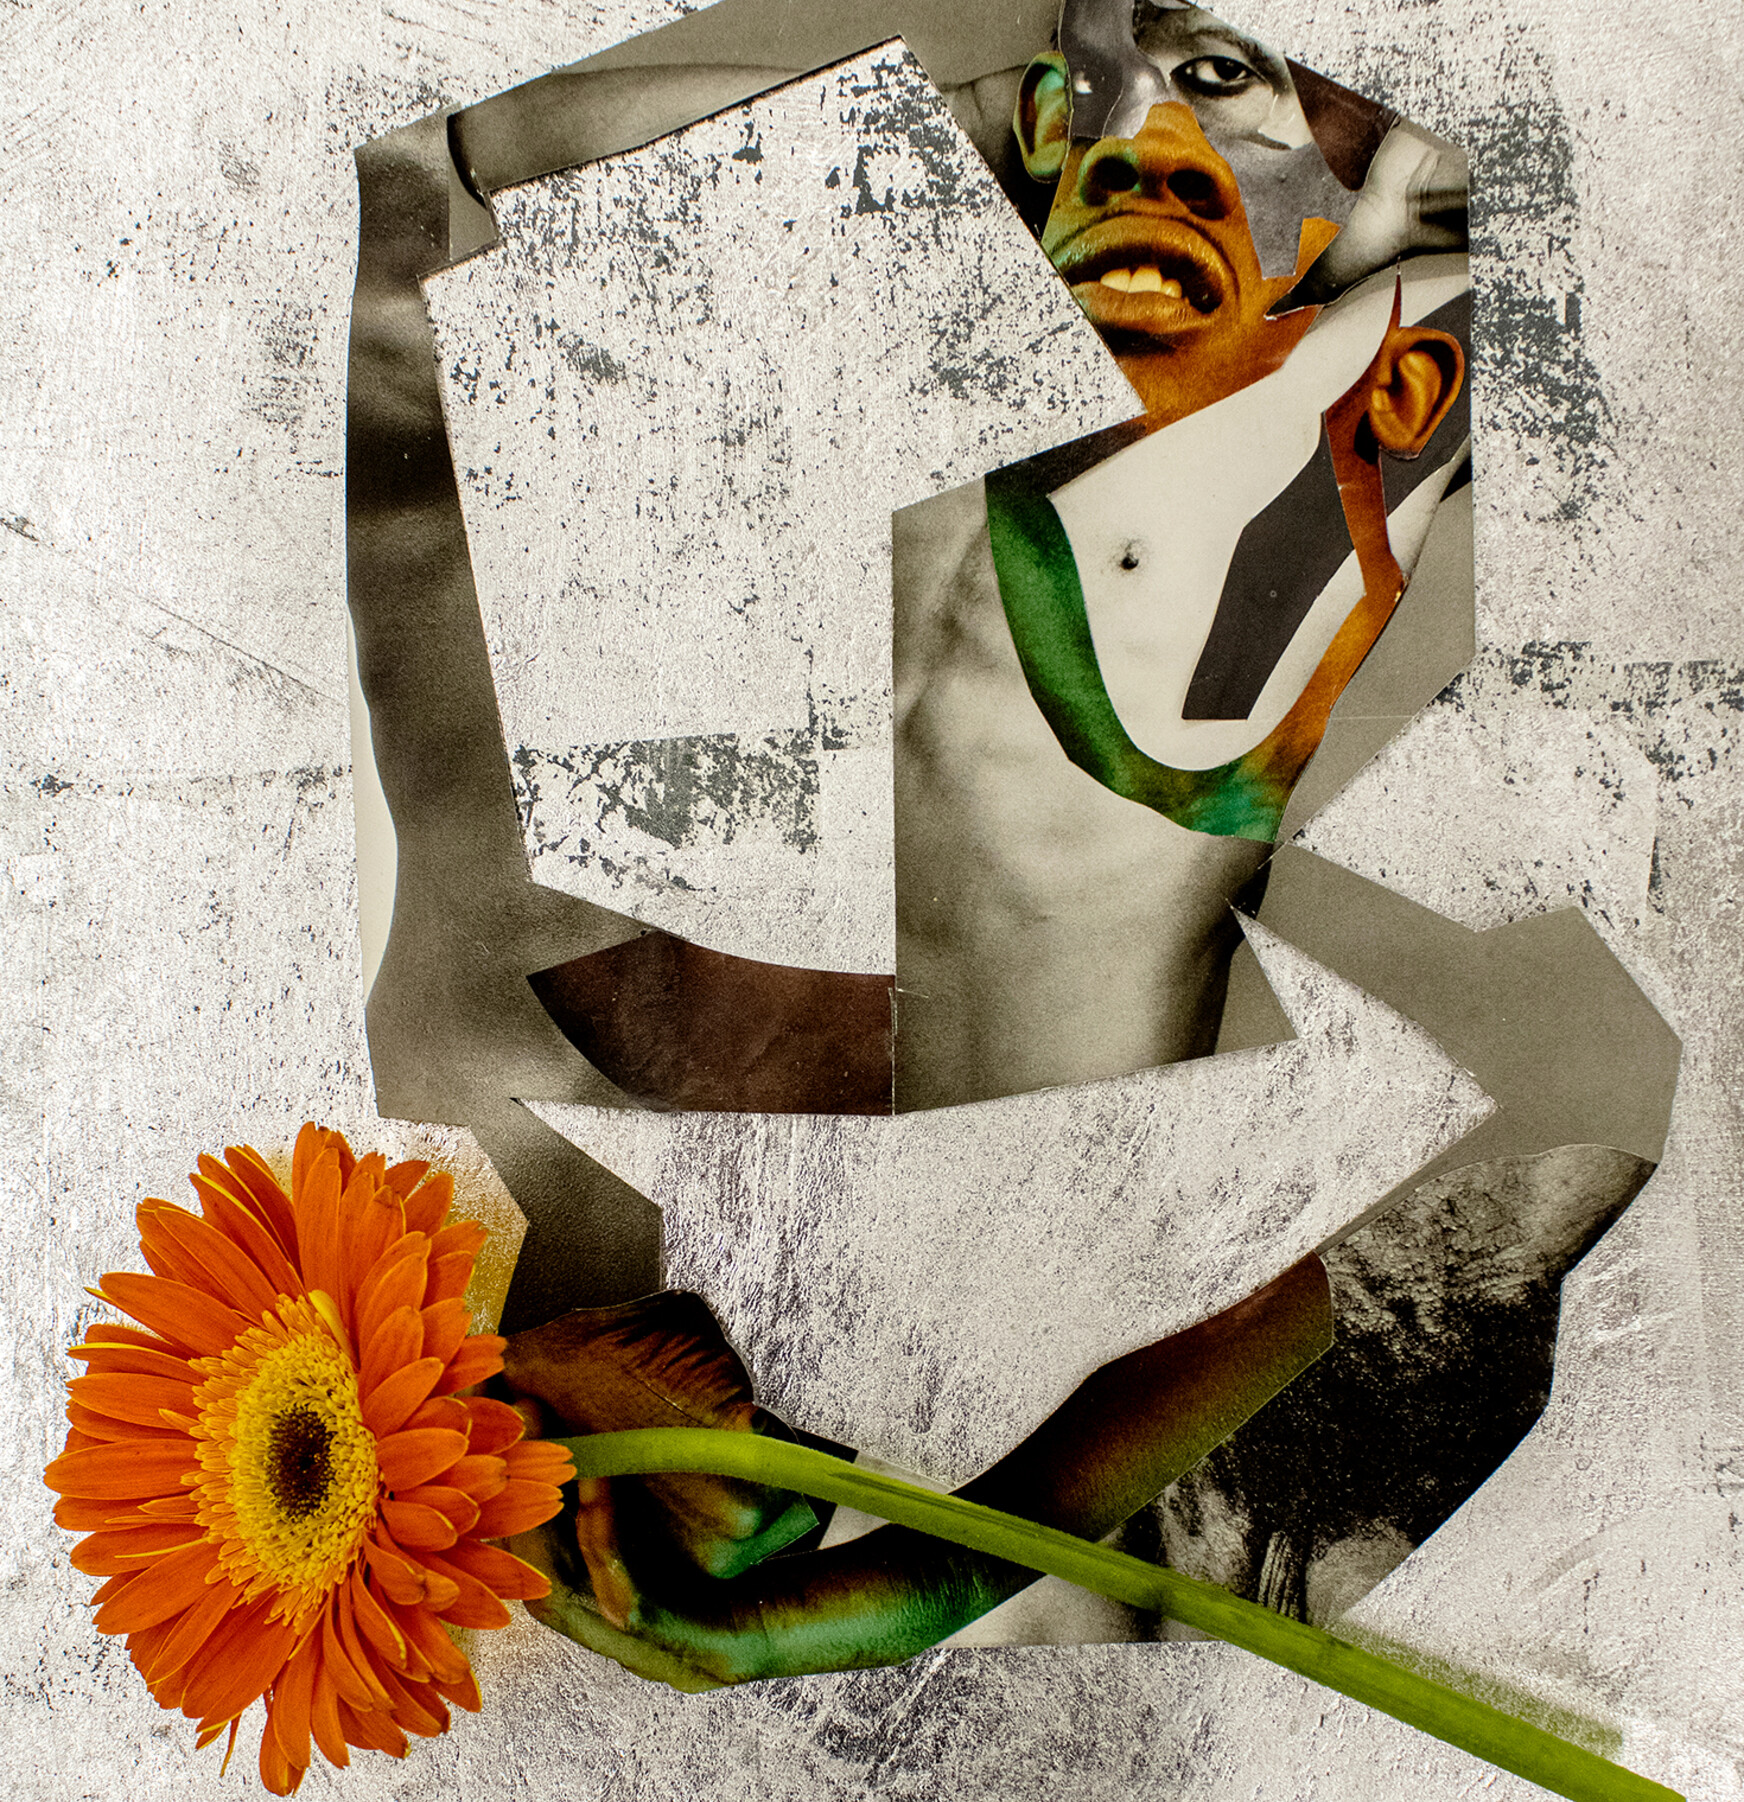 collage with gray fragments, face, and orange flower